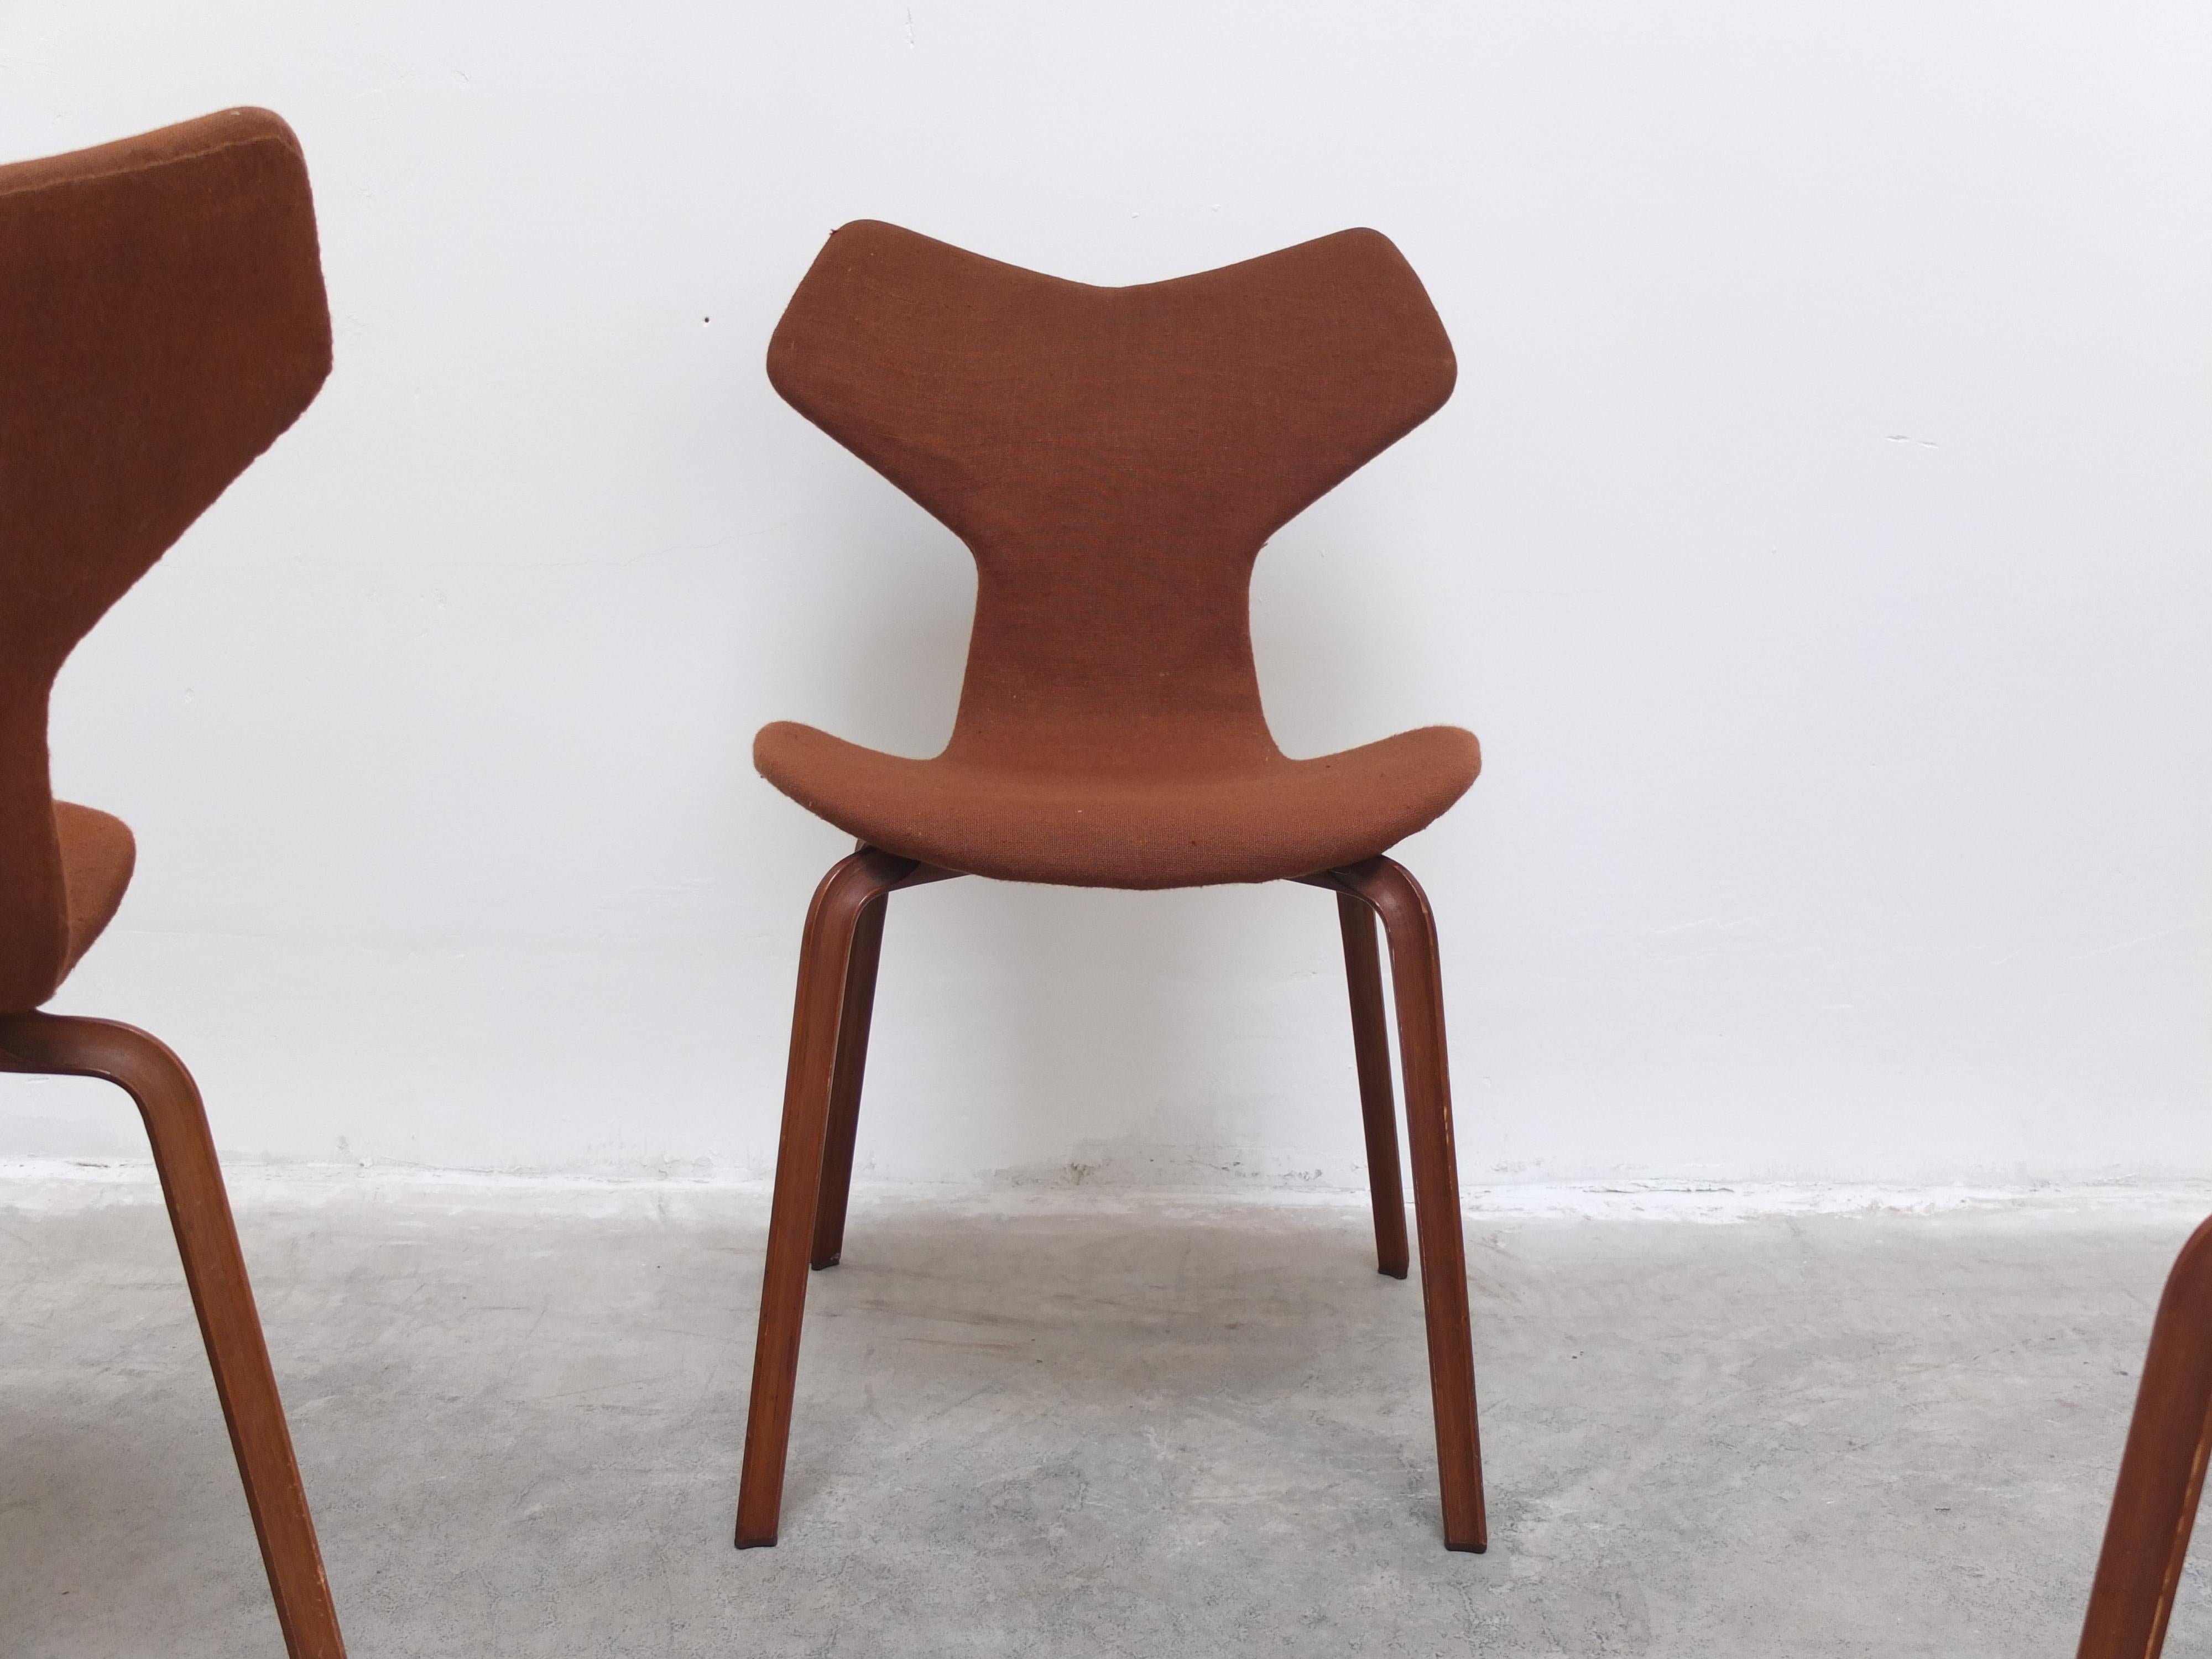 Set of 4 1st Edition 'Grand Prix' Chairs by Arne Jacobsen for Fritz Hansen, 1957 For Sale 8